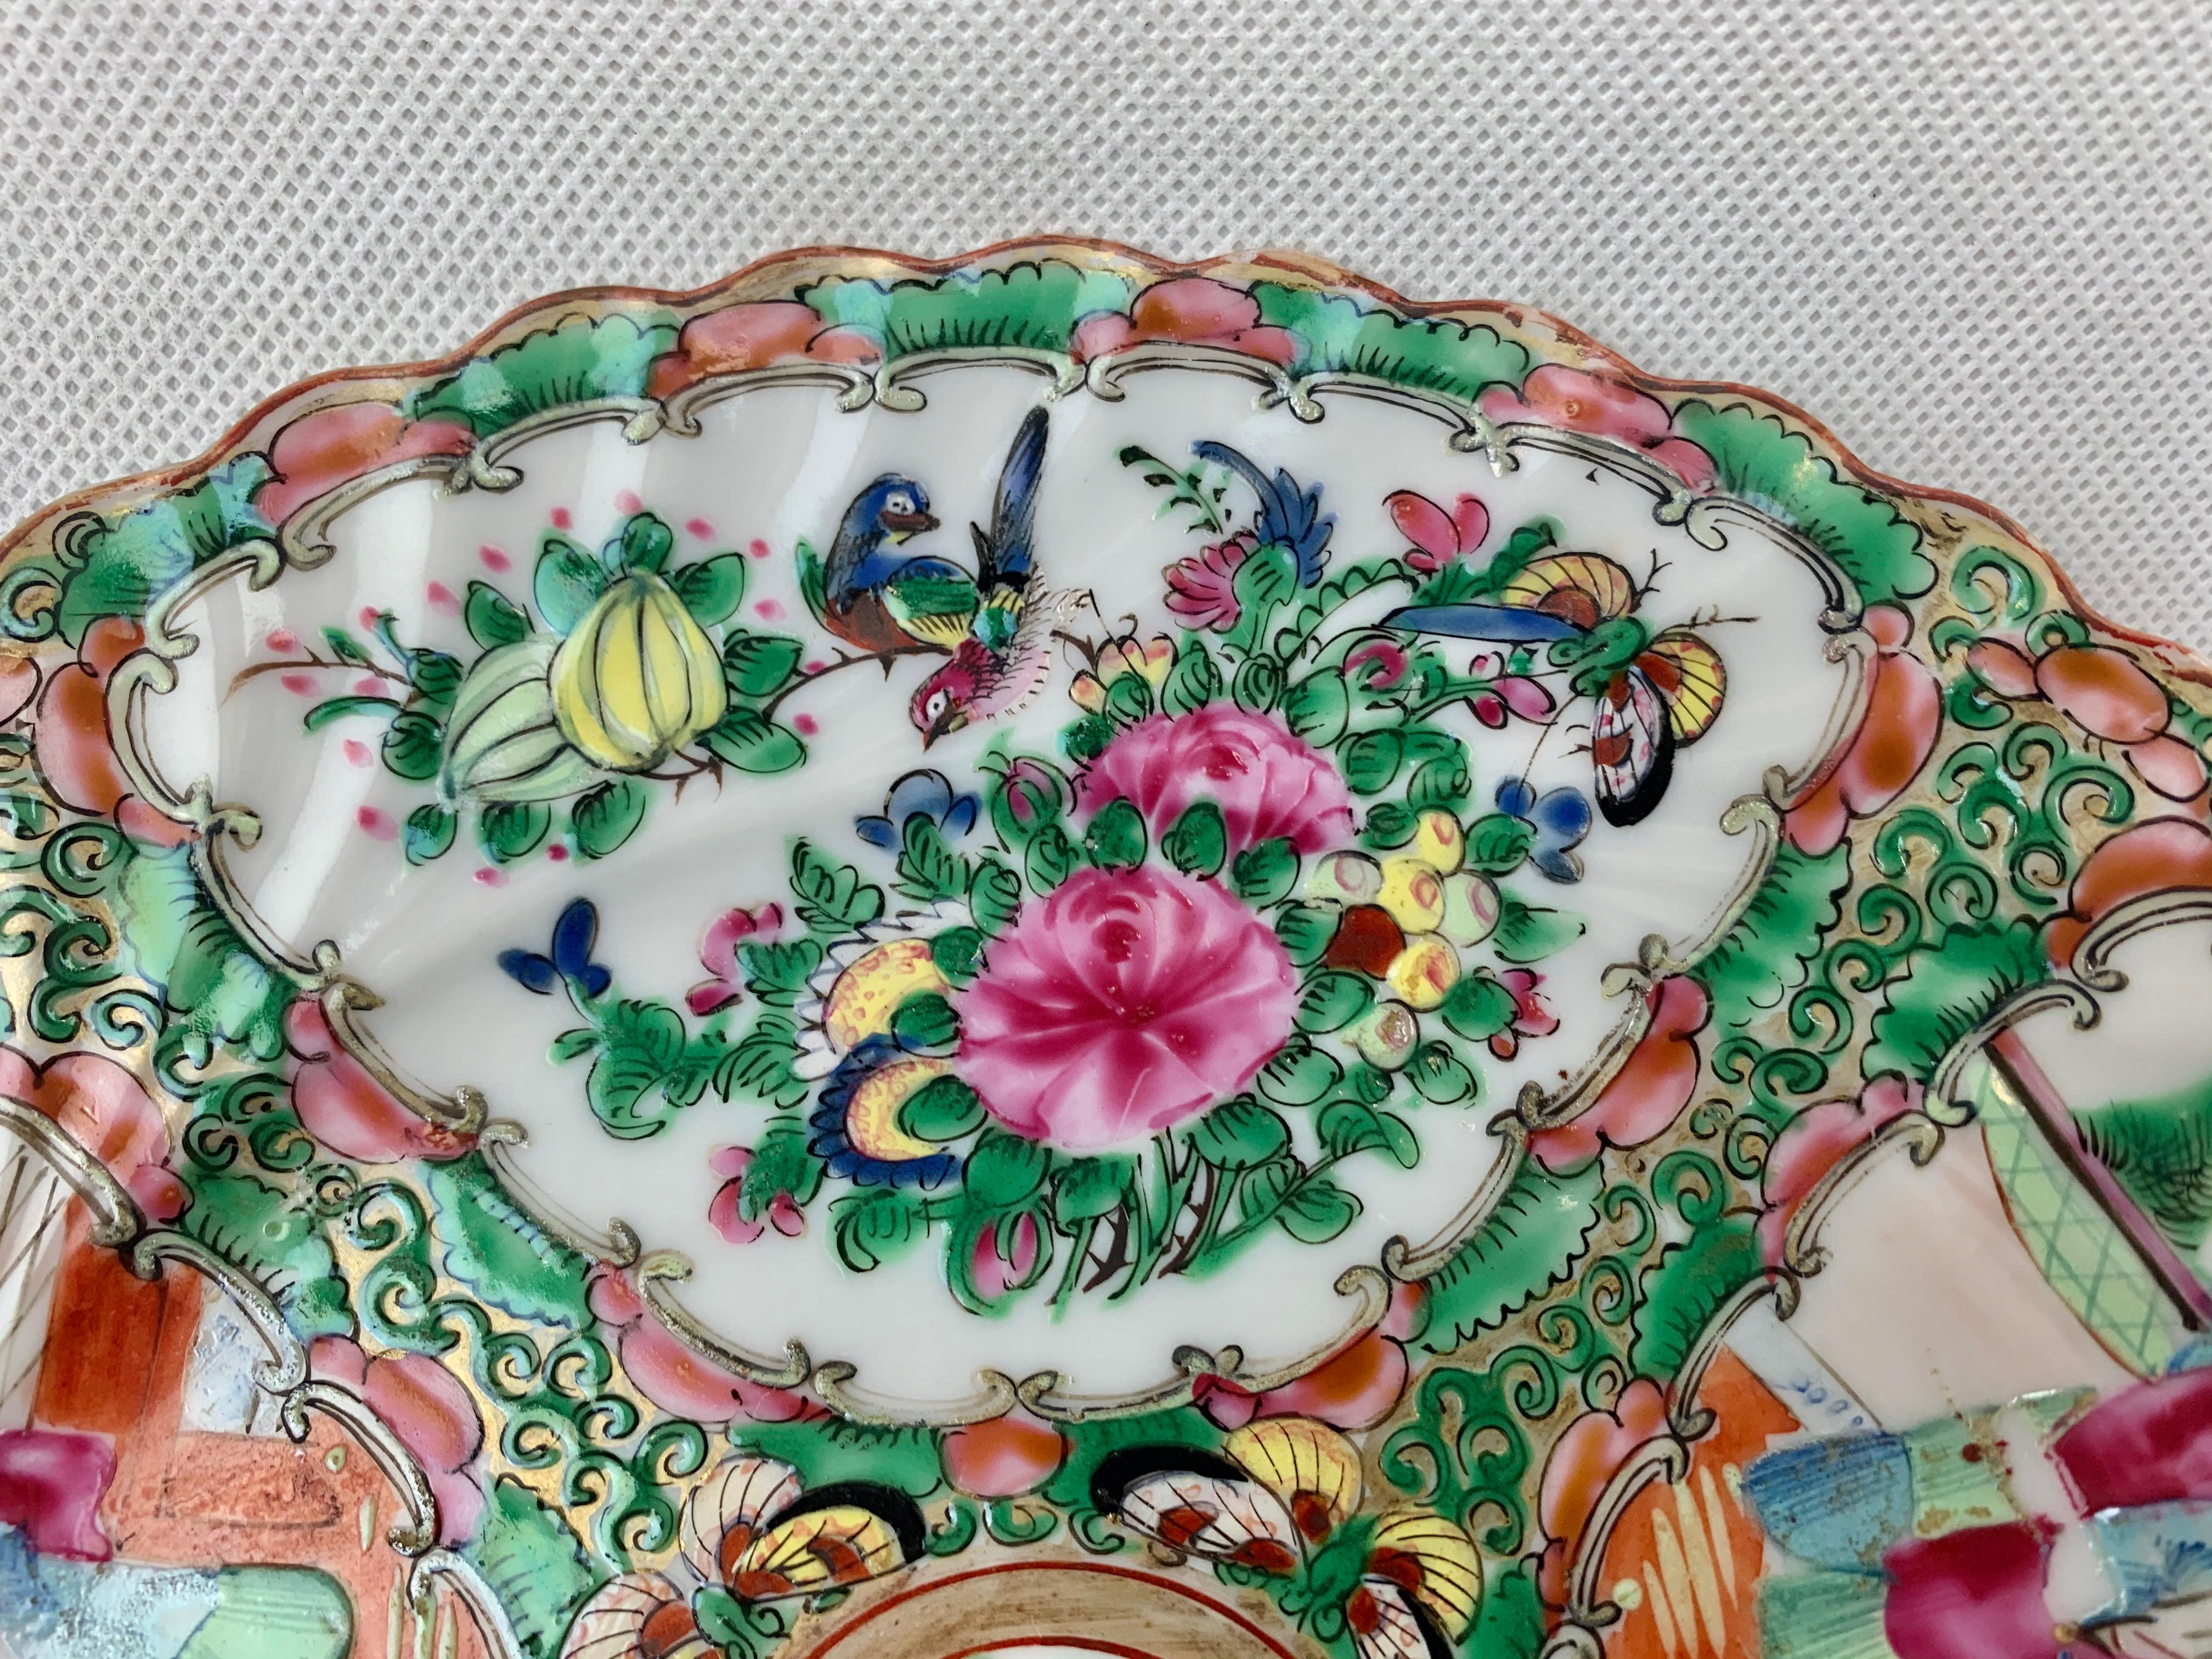 Chinese Export scalloped edge porcelain plate in the Rose Medallion style. Hand decorated in lively pastel colors on a plate form with a swirled design. The plate is divided into four quadrants, two with people and two with flowers and birds. There